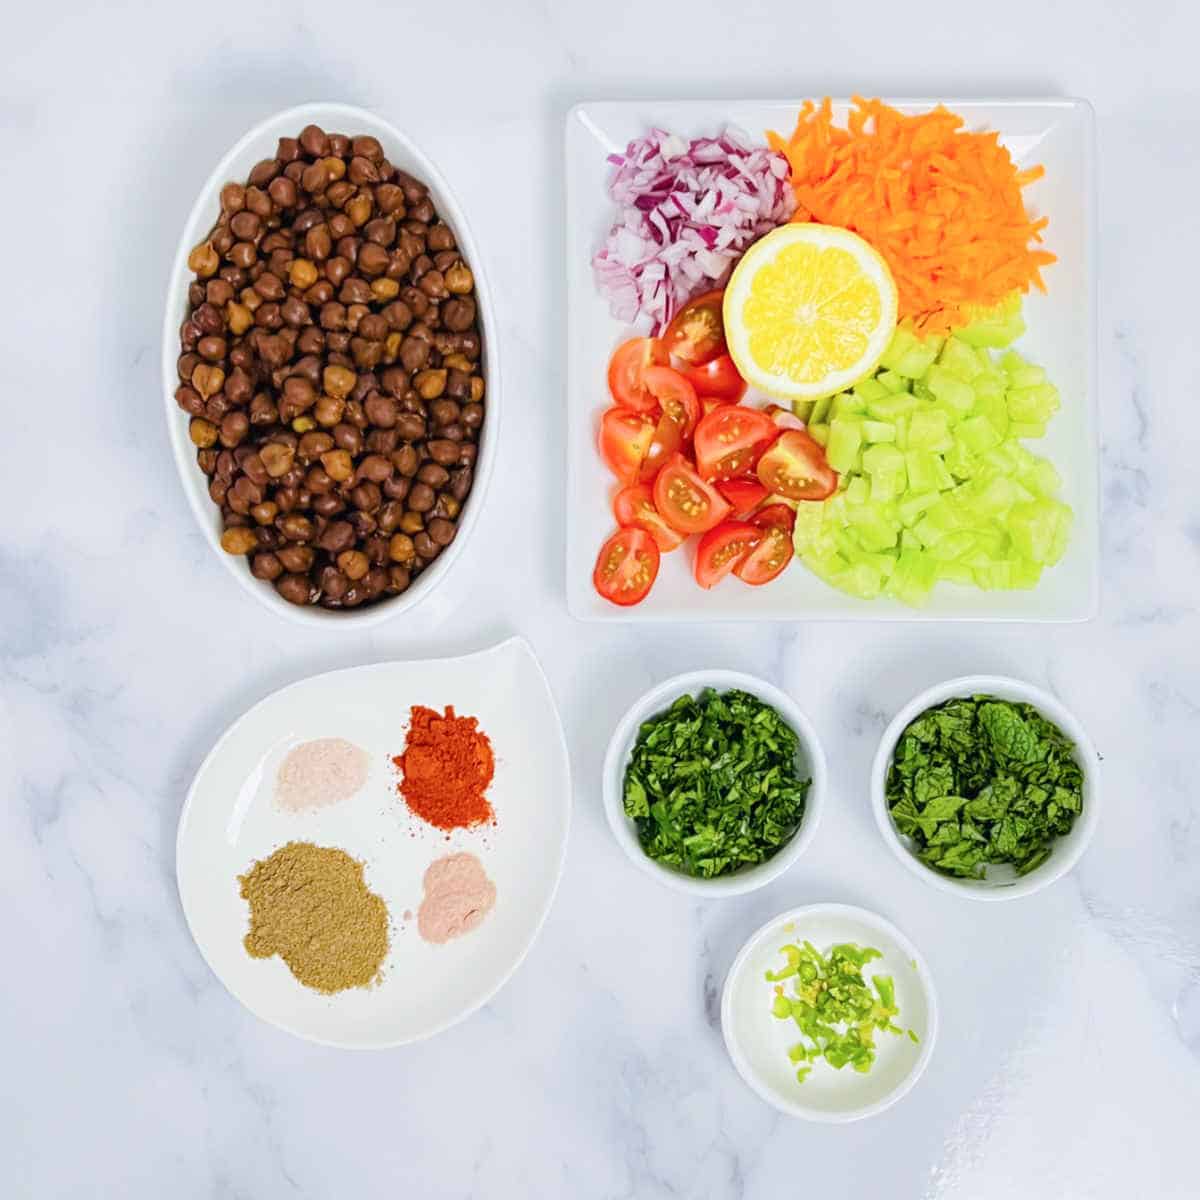 Kala chana chaat ingredients placed on a marble surface.